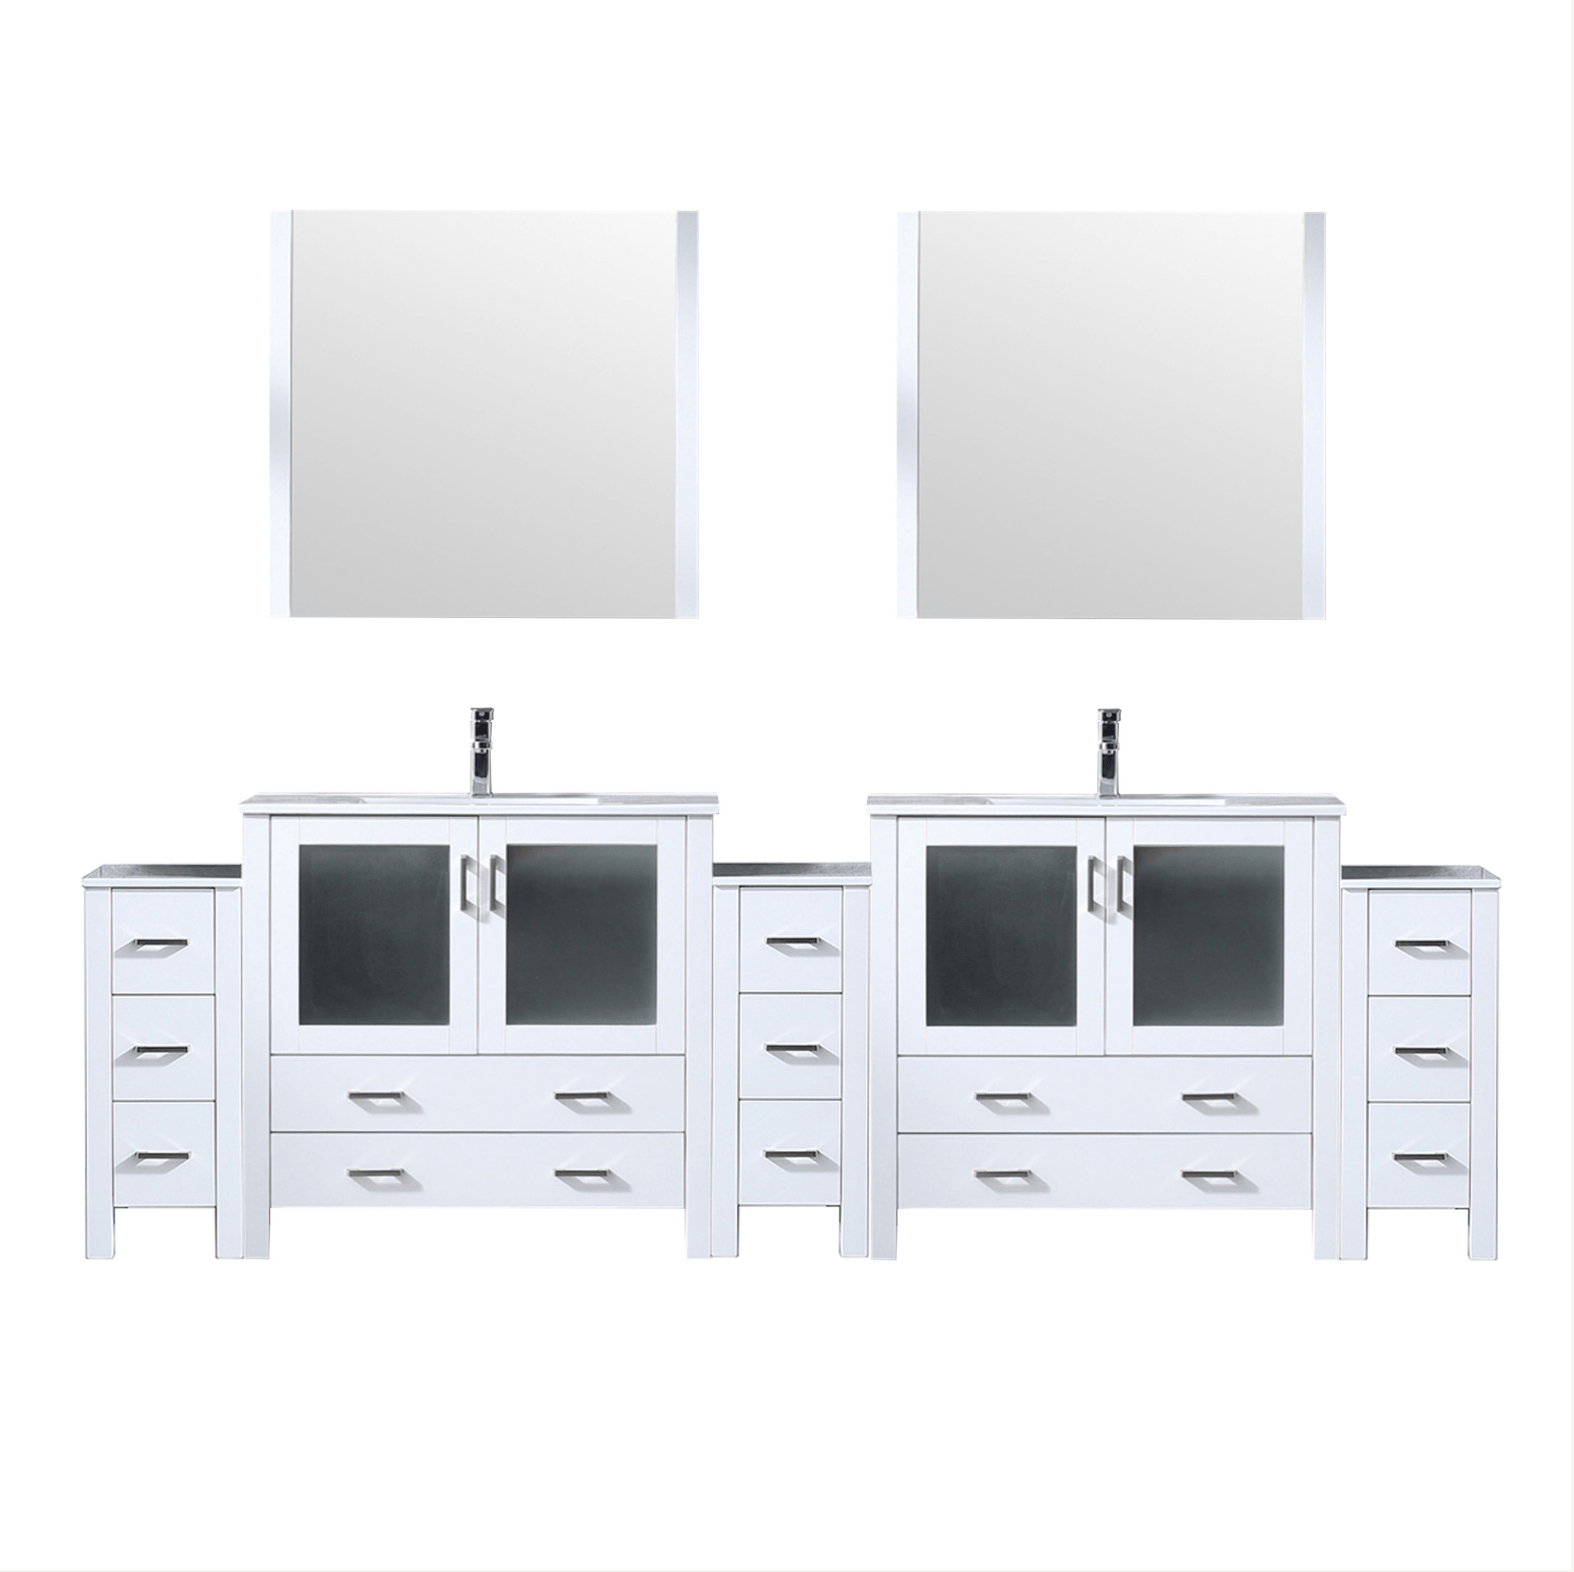 Bell + Modern Bathroom Vanity Harborfront Double Bath Vanity with Side Cabinets in White Ceramic Top